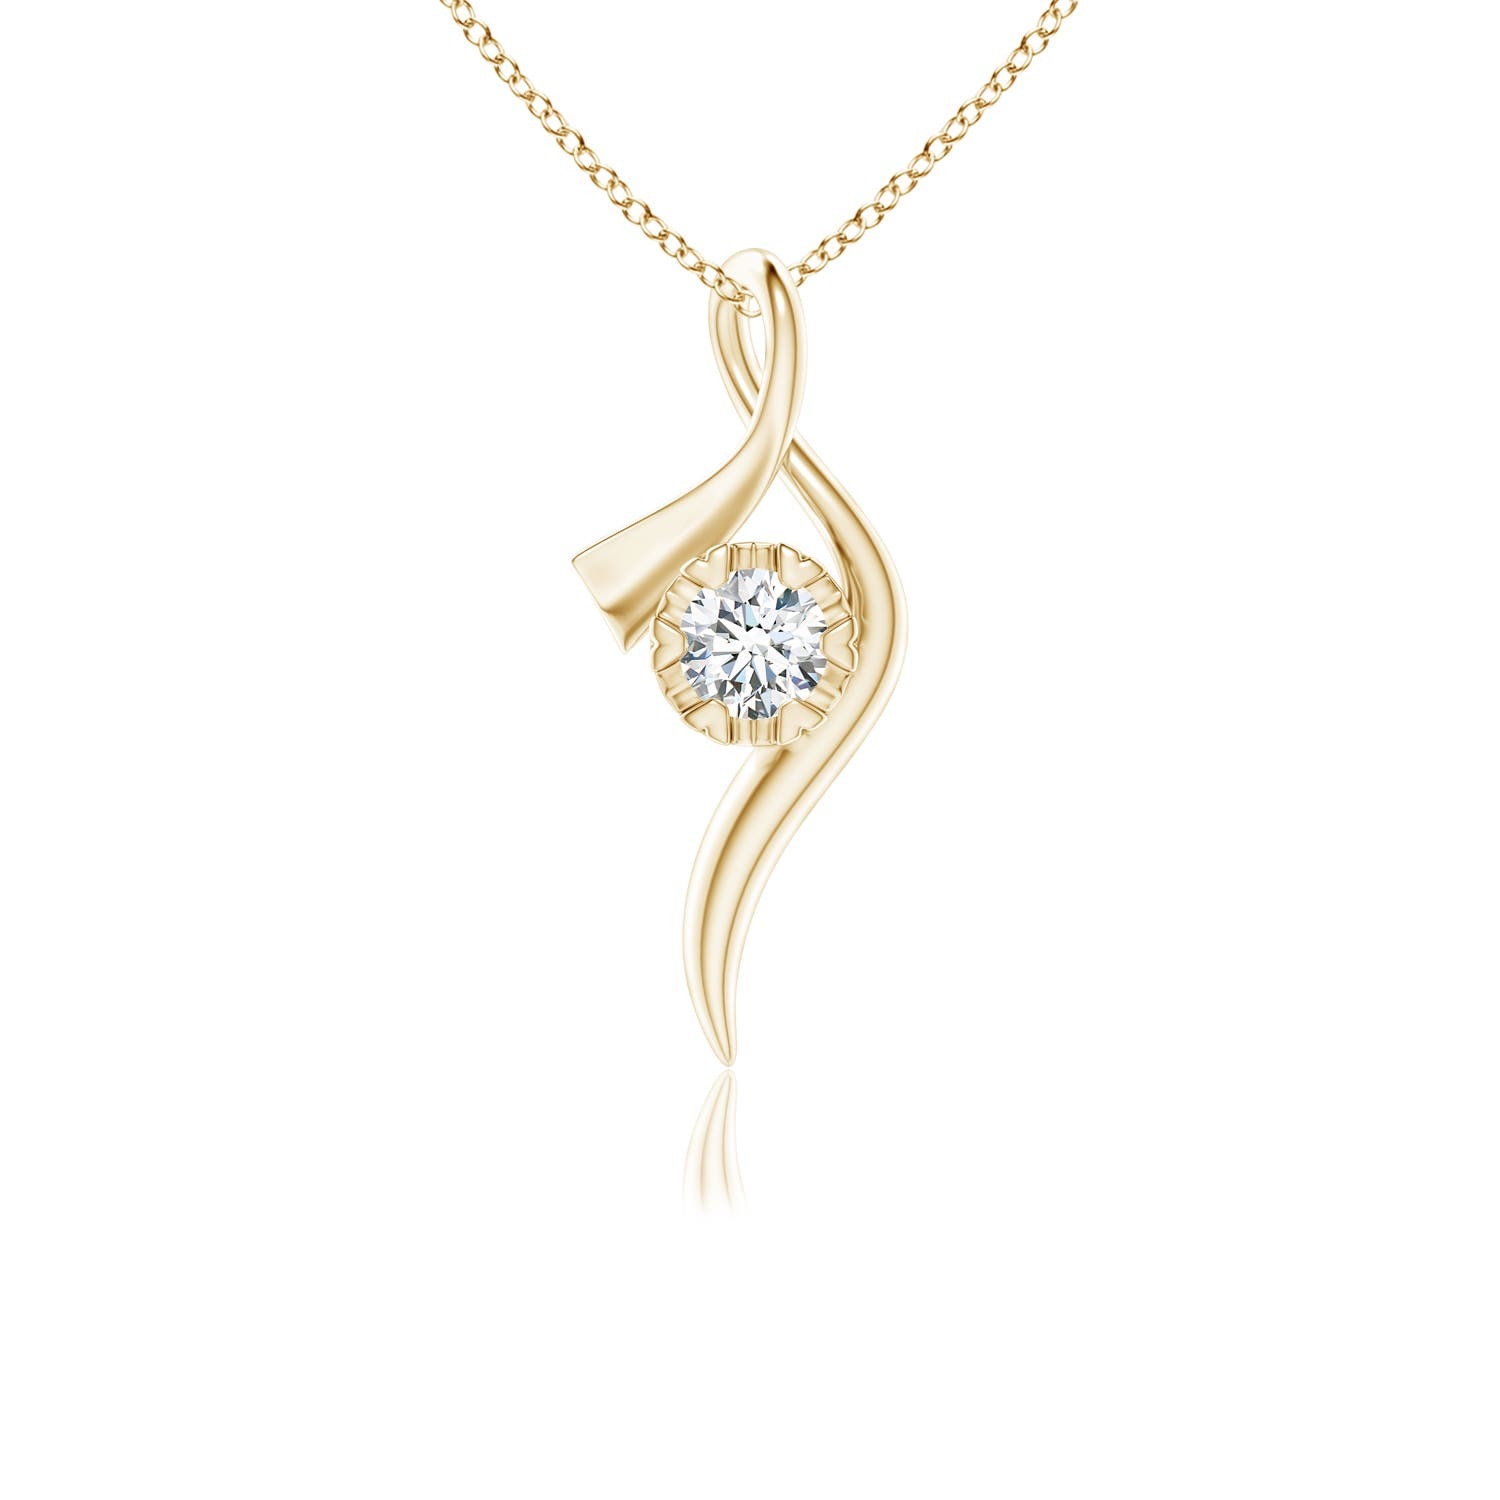 Primary image for ANGARA Lab-Grown 0.33 Ct Solitaire Diamond Ribbon Pendant Necklace in 14K Gold